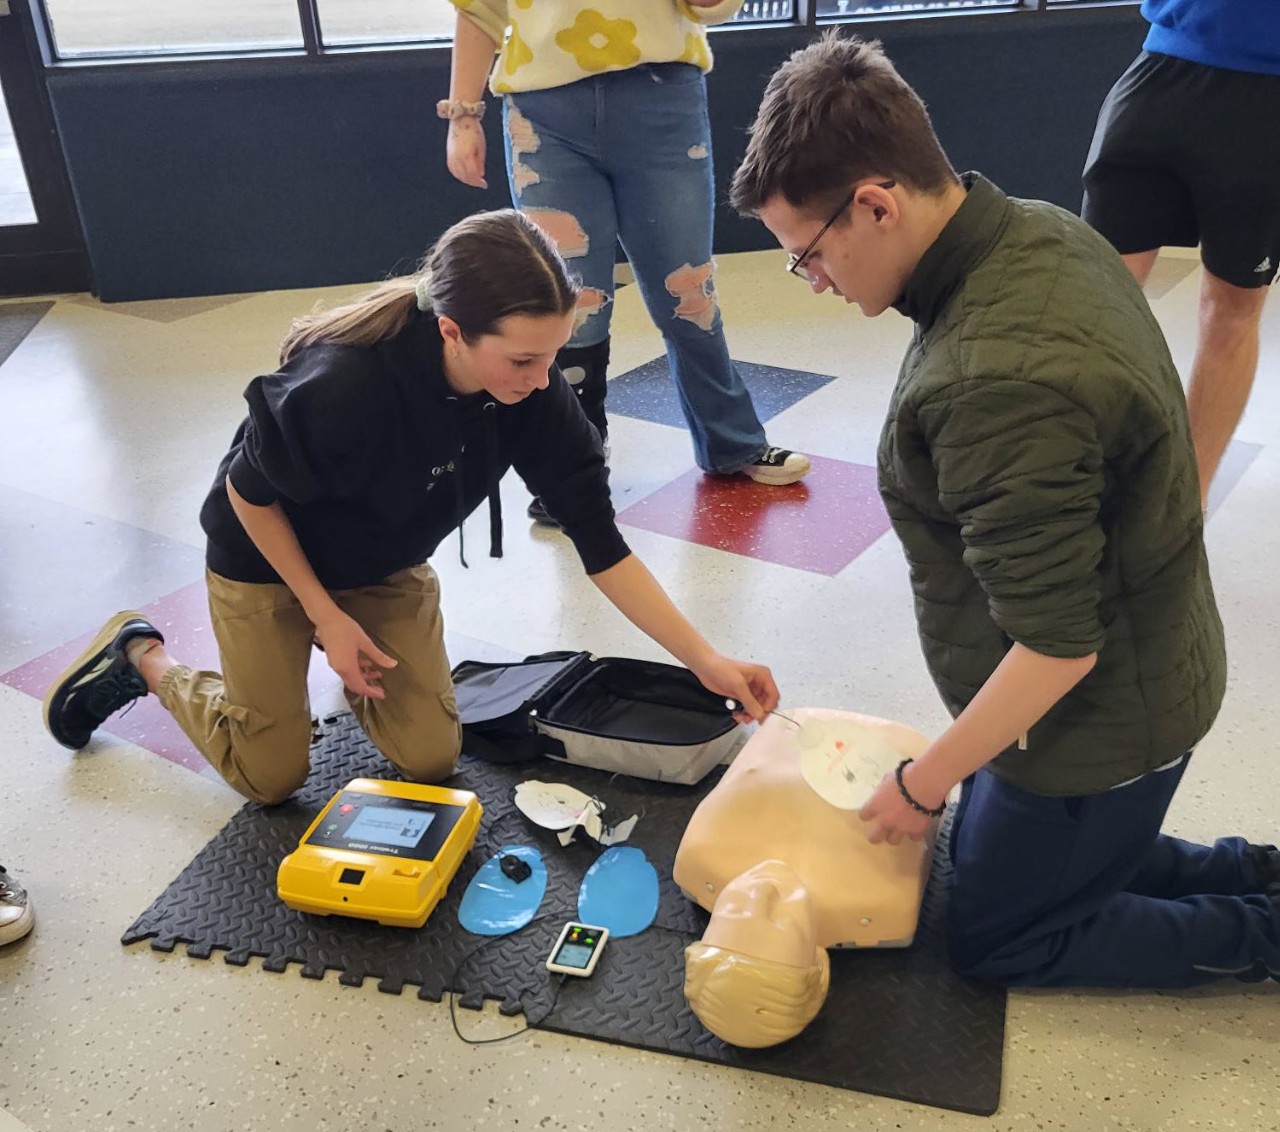 Two Liberty students use an AED (automated external defibrillator) on a manikin during a training course at Liberty High School.